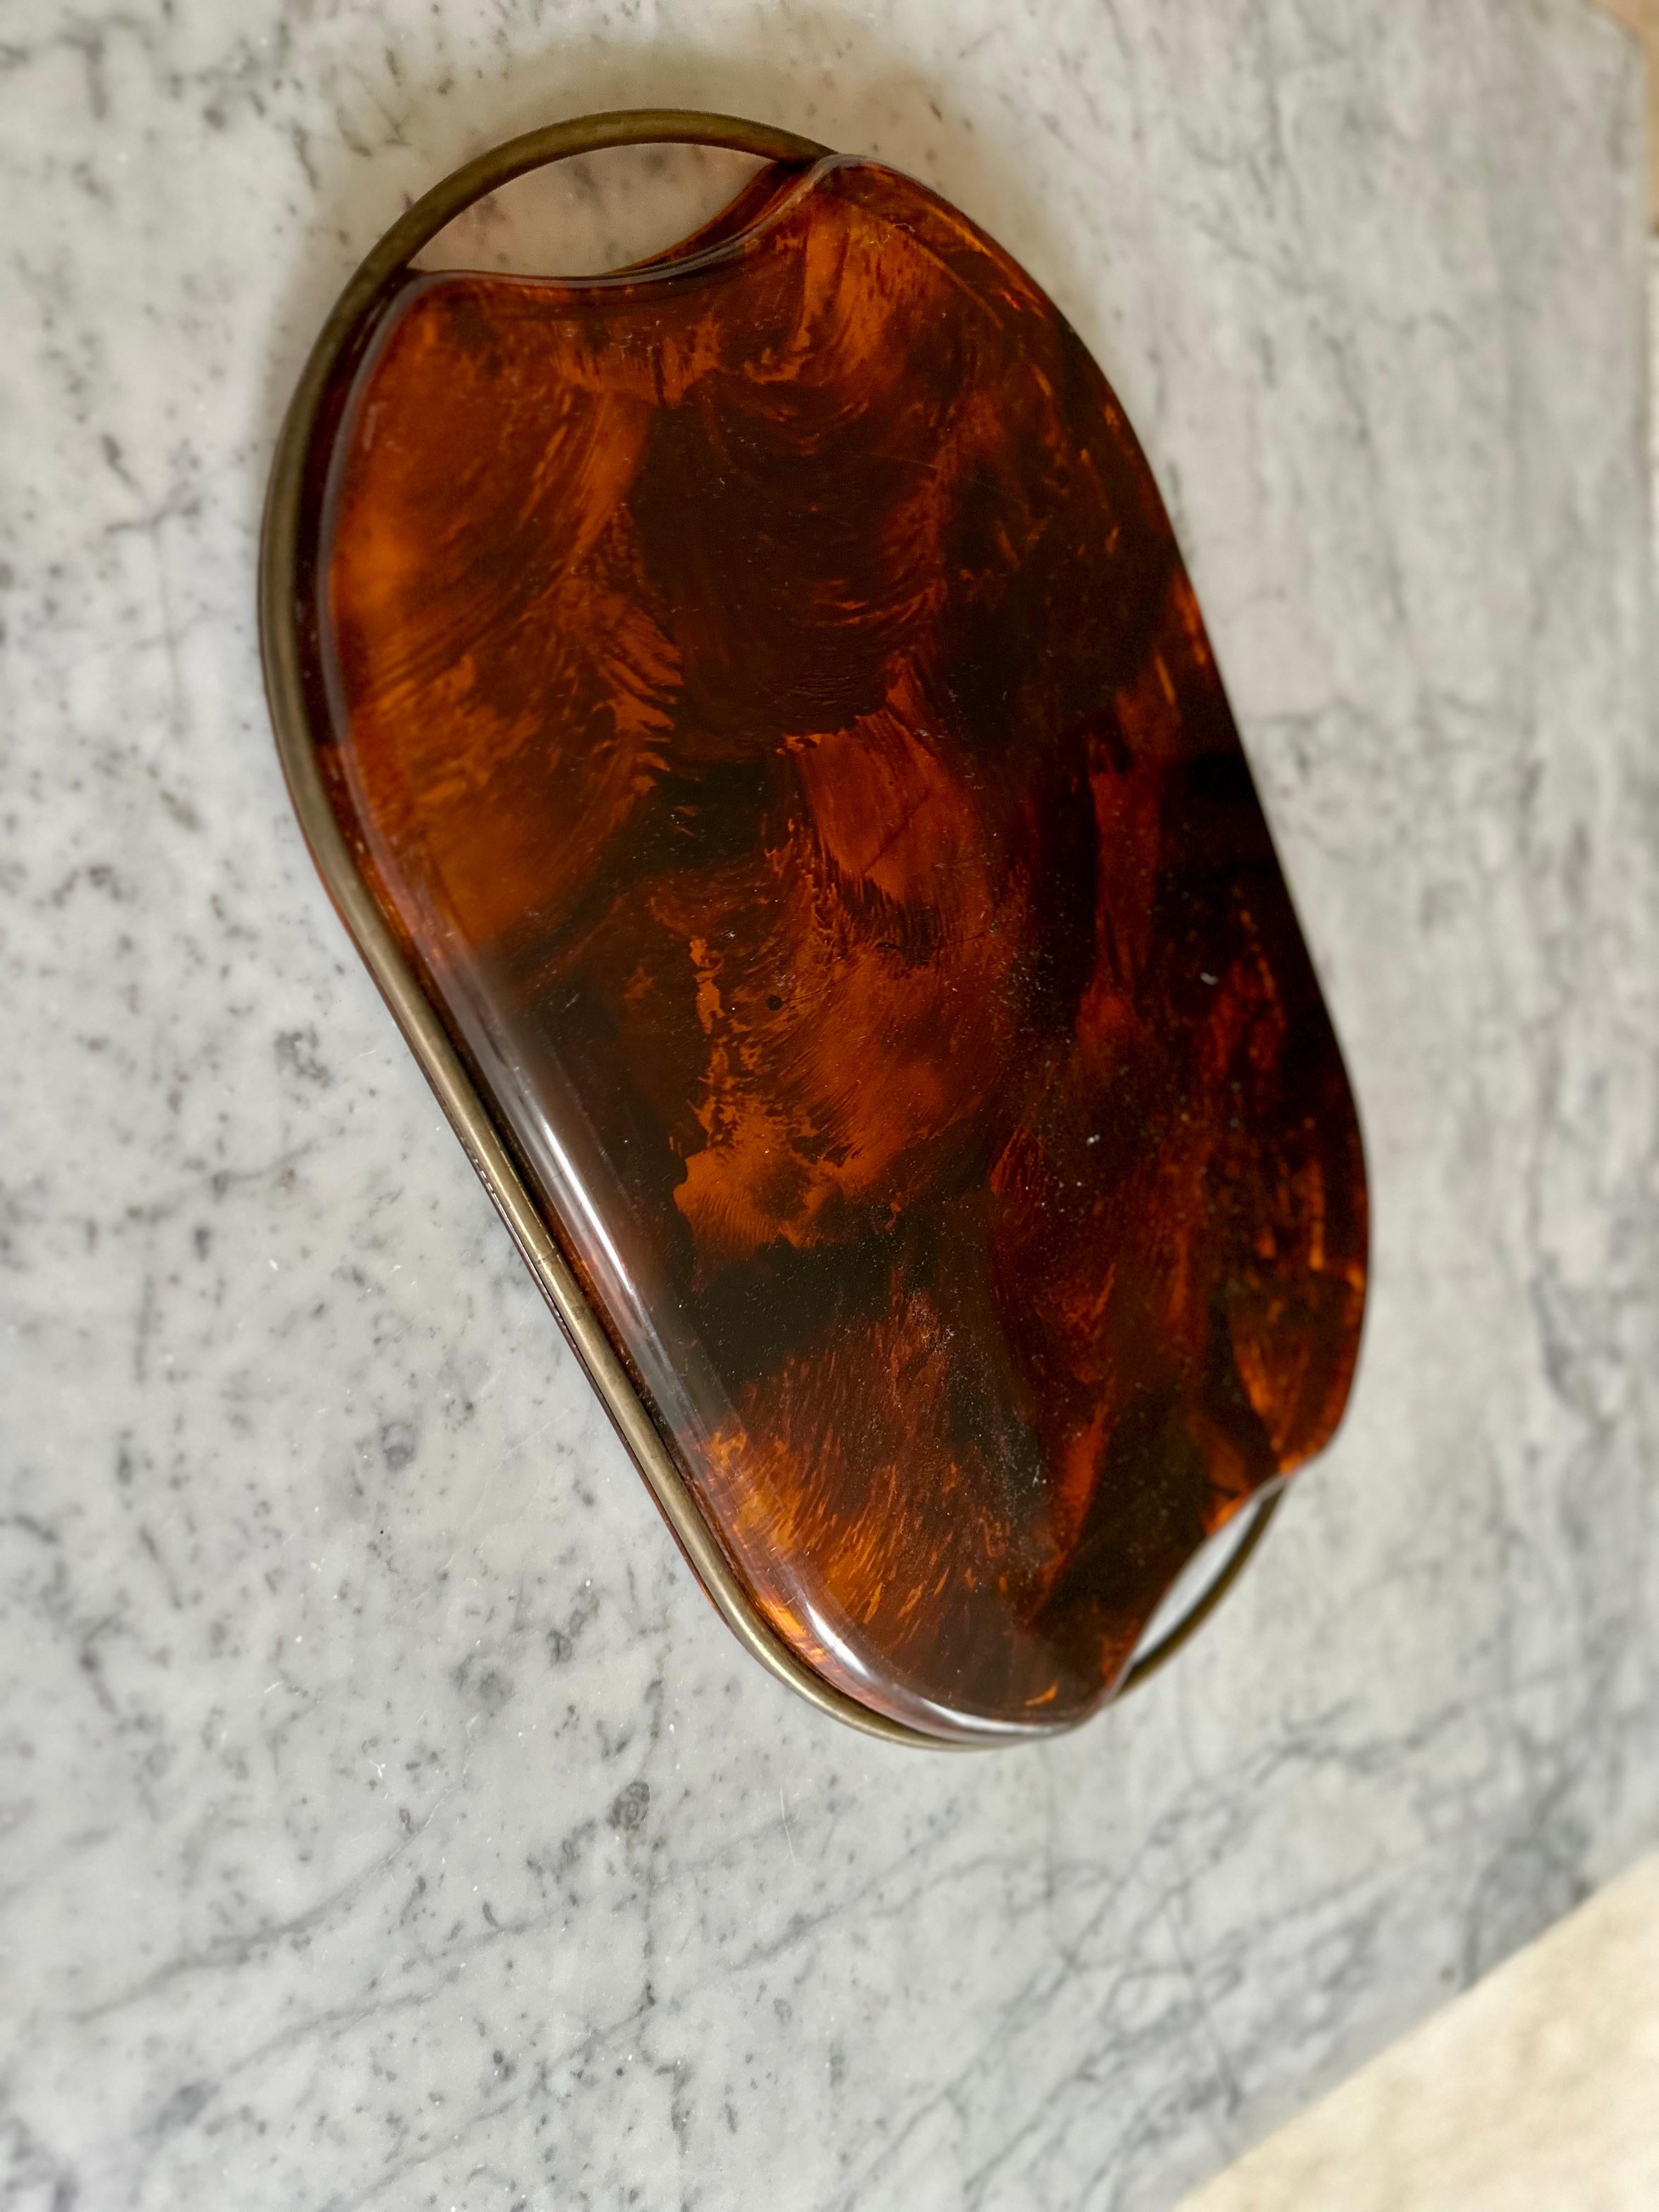  Guzzini’s Oval Lucite Serving Tray from 1970s Italy – Faux Tortoiseshell -brass For Sale 6